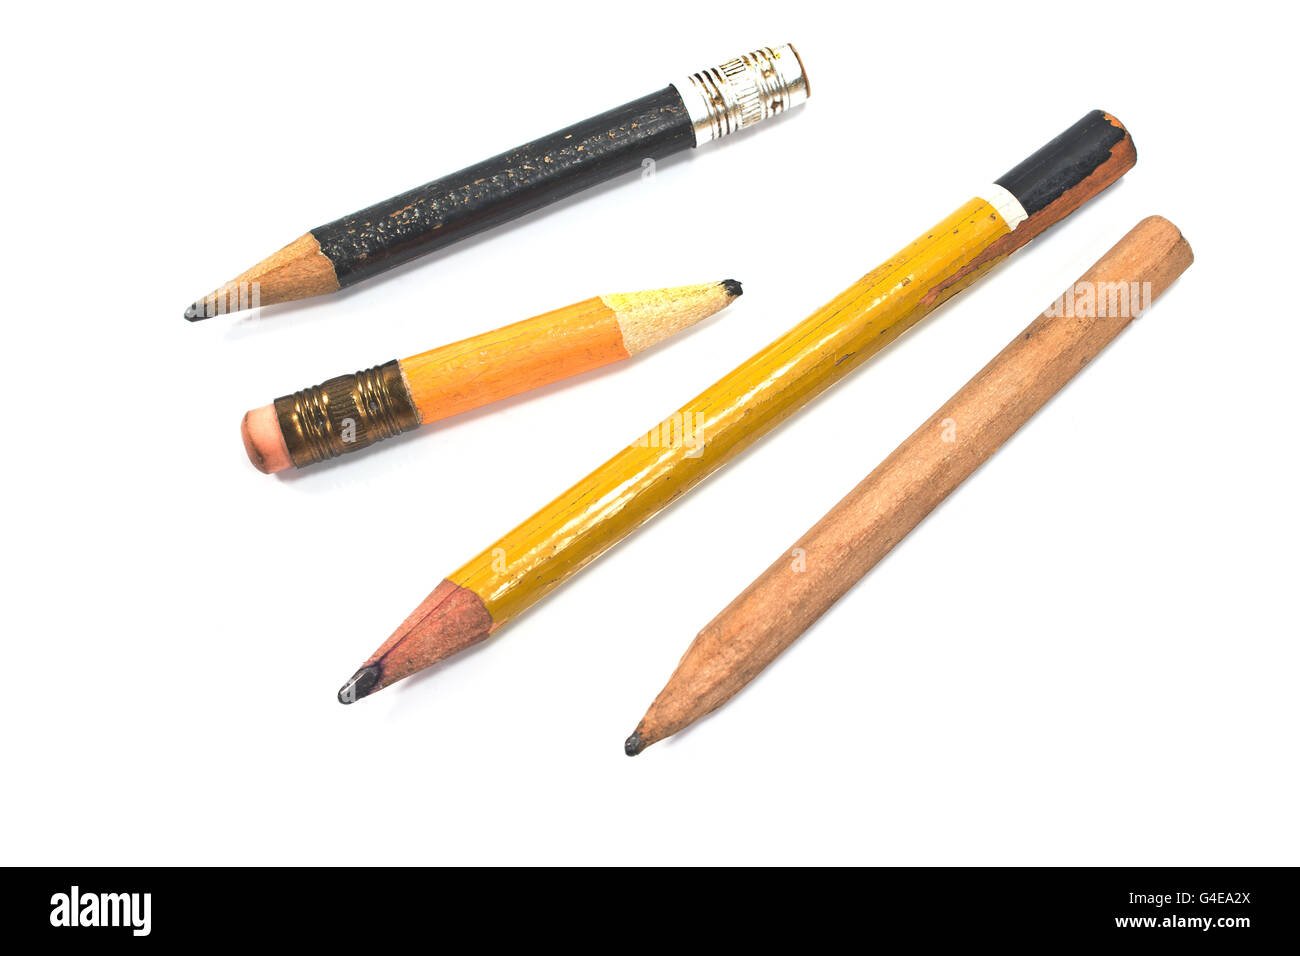 Eraser on pencil. stock image. Image of work, isolated - 2425681